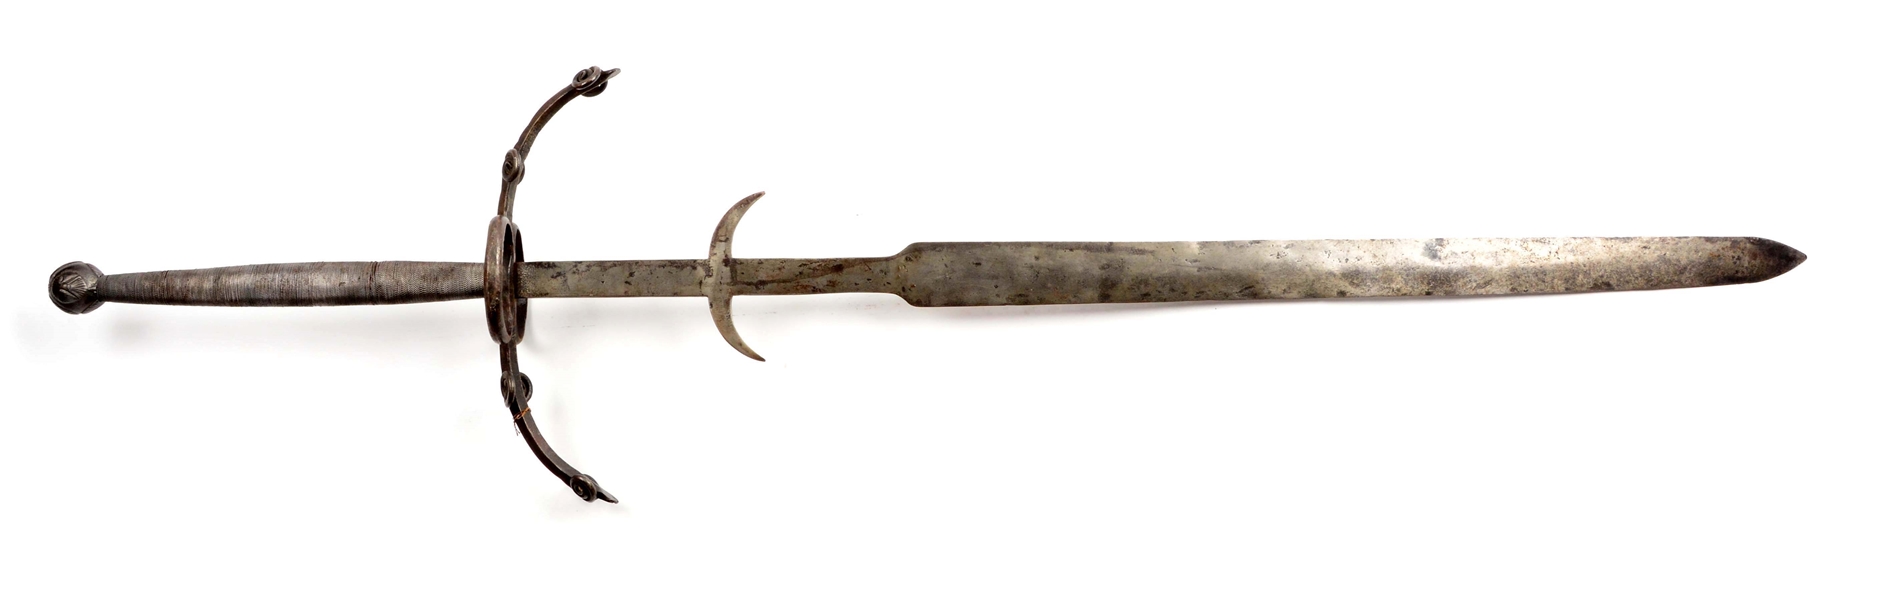 TWO HANDED 19TH CENTURY PROCESSIONAL SWORD.